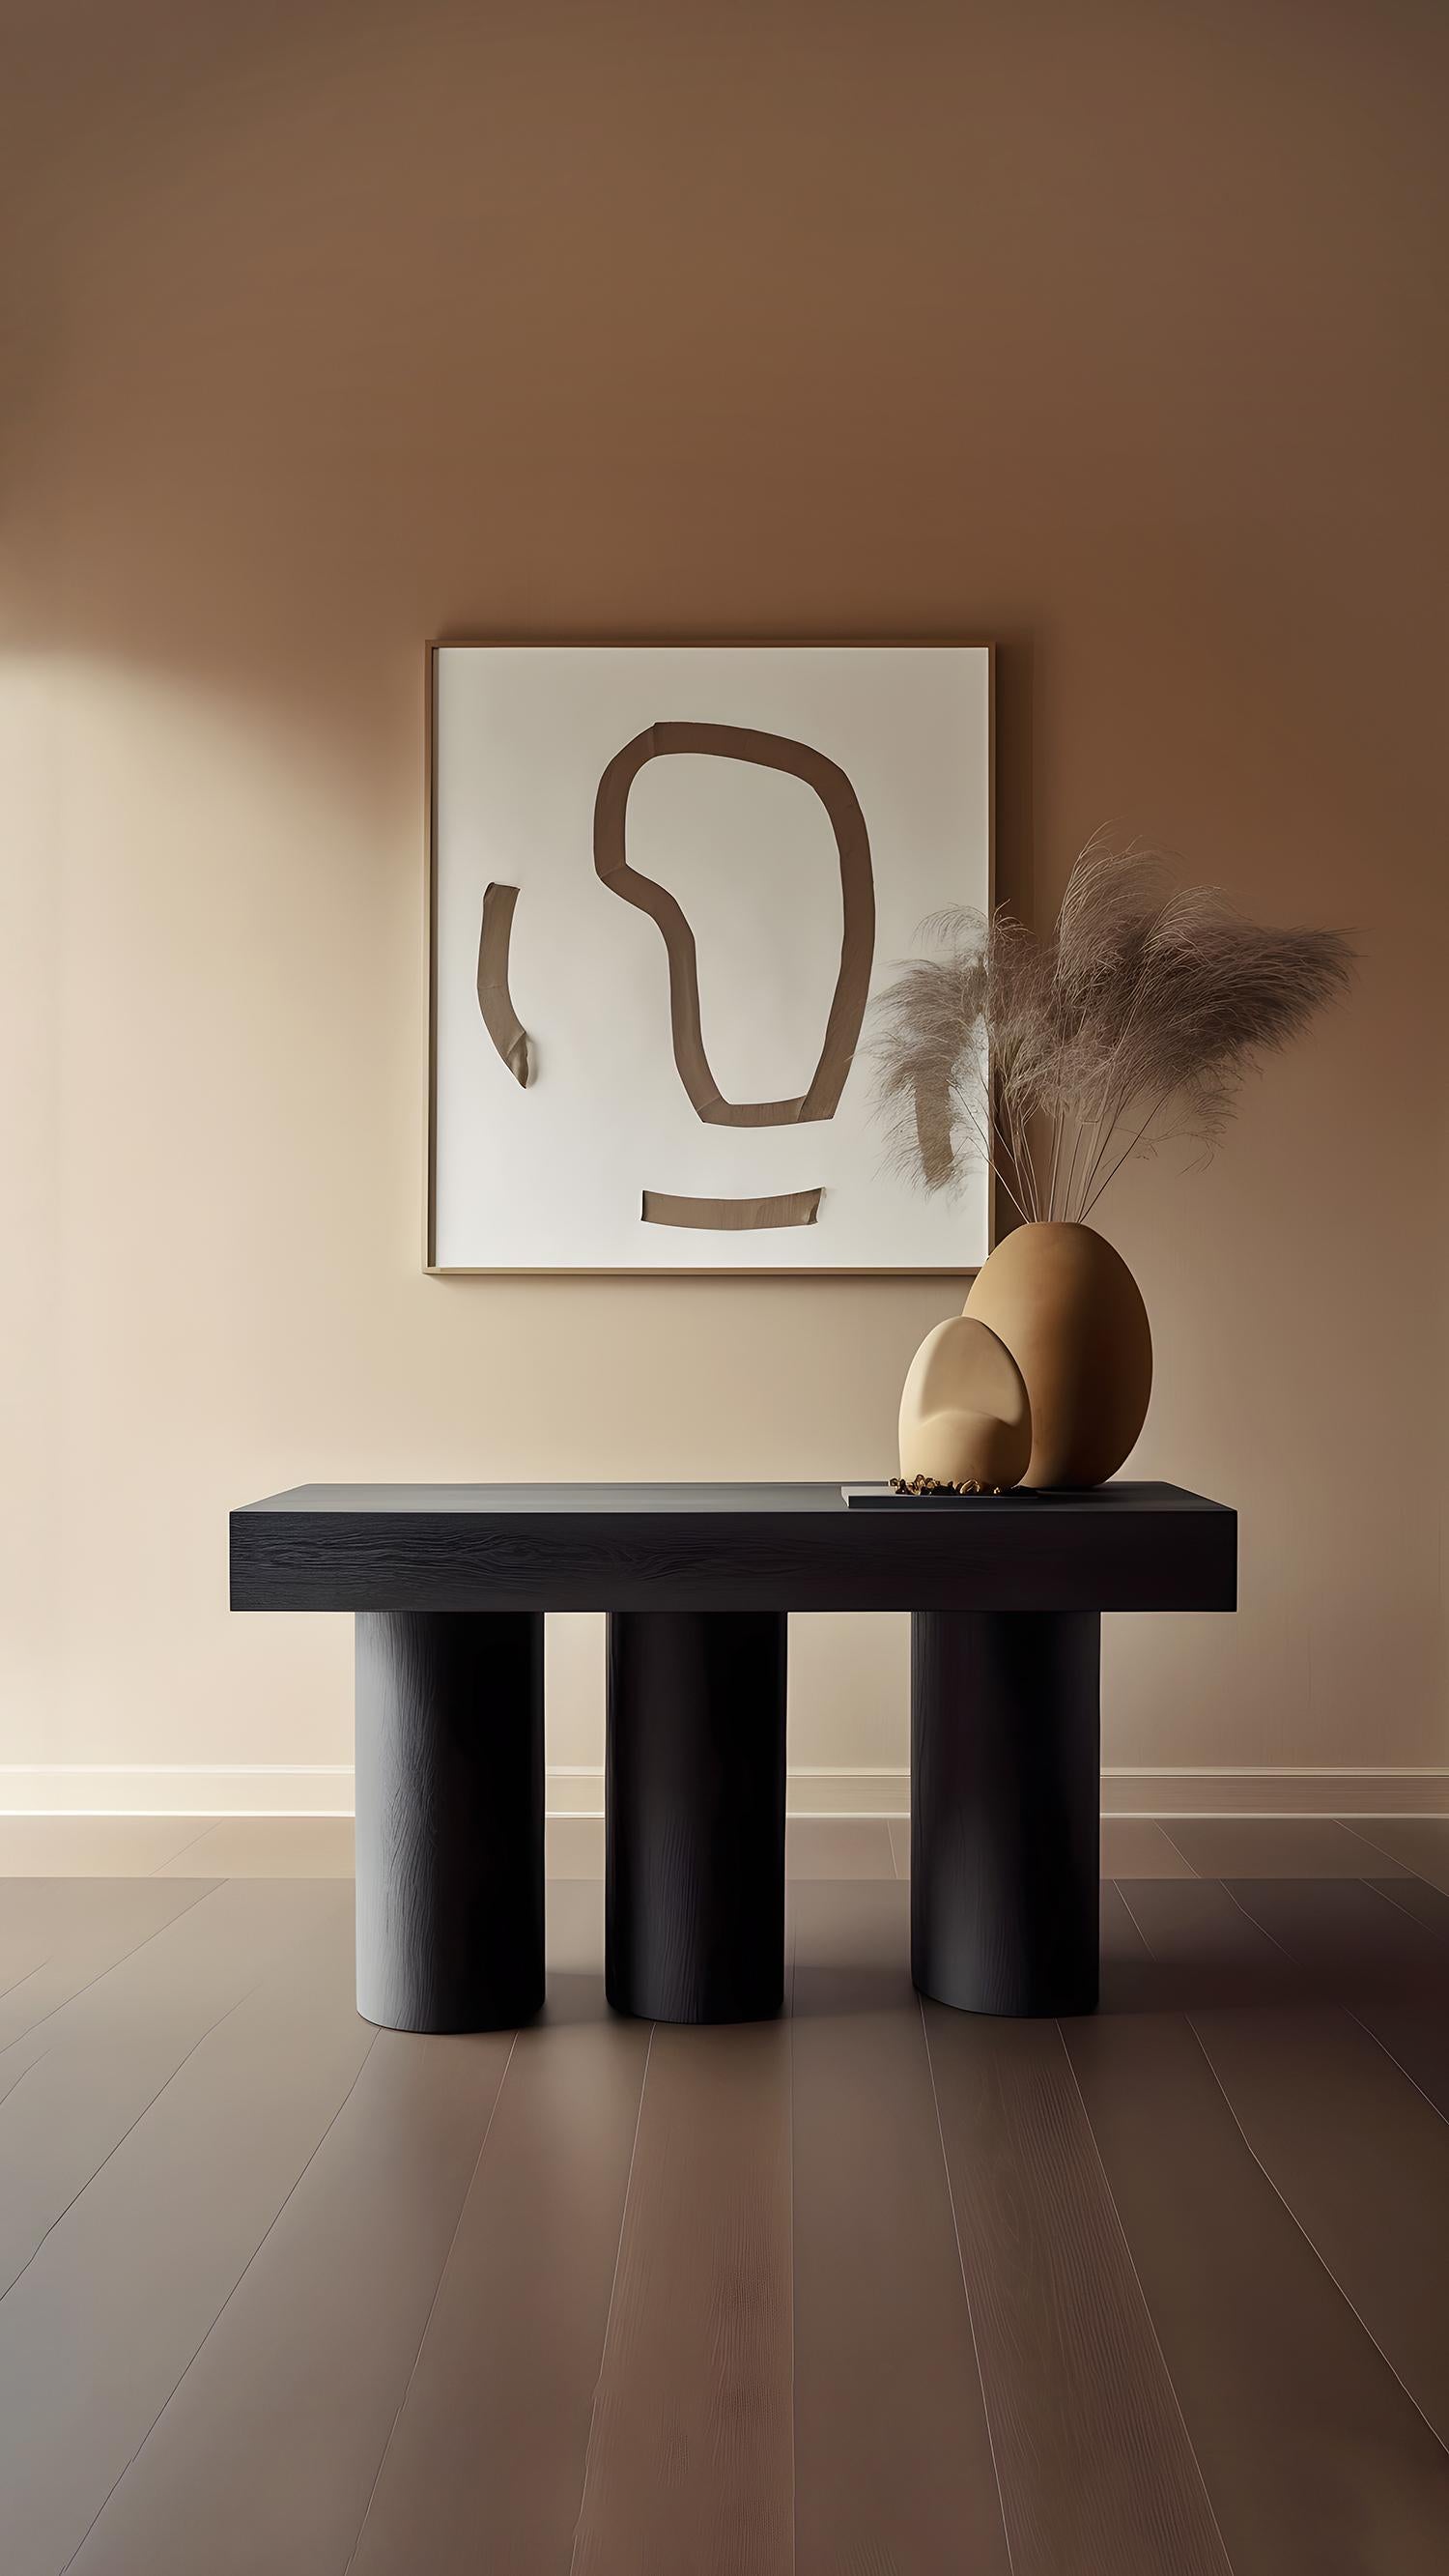 Podio rectangular console table

The NONO design team presents a console table that exudes elegance and modernity. The foundation of this piece is a cluster of cylindrical columns, providing a sturdy base for the beautiful rectangular top. Its